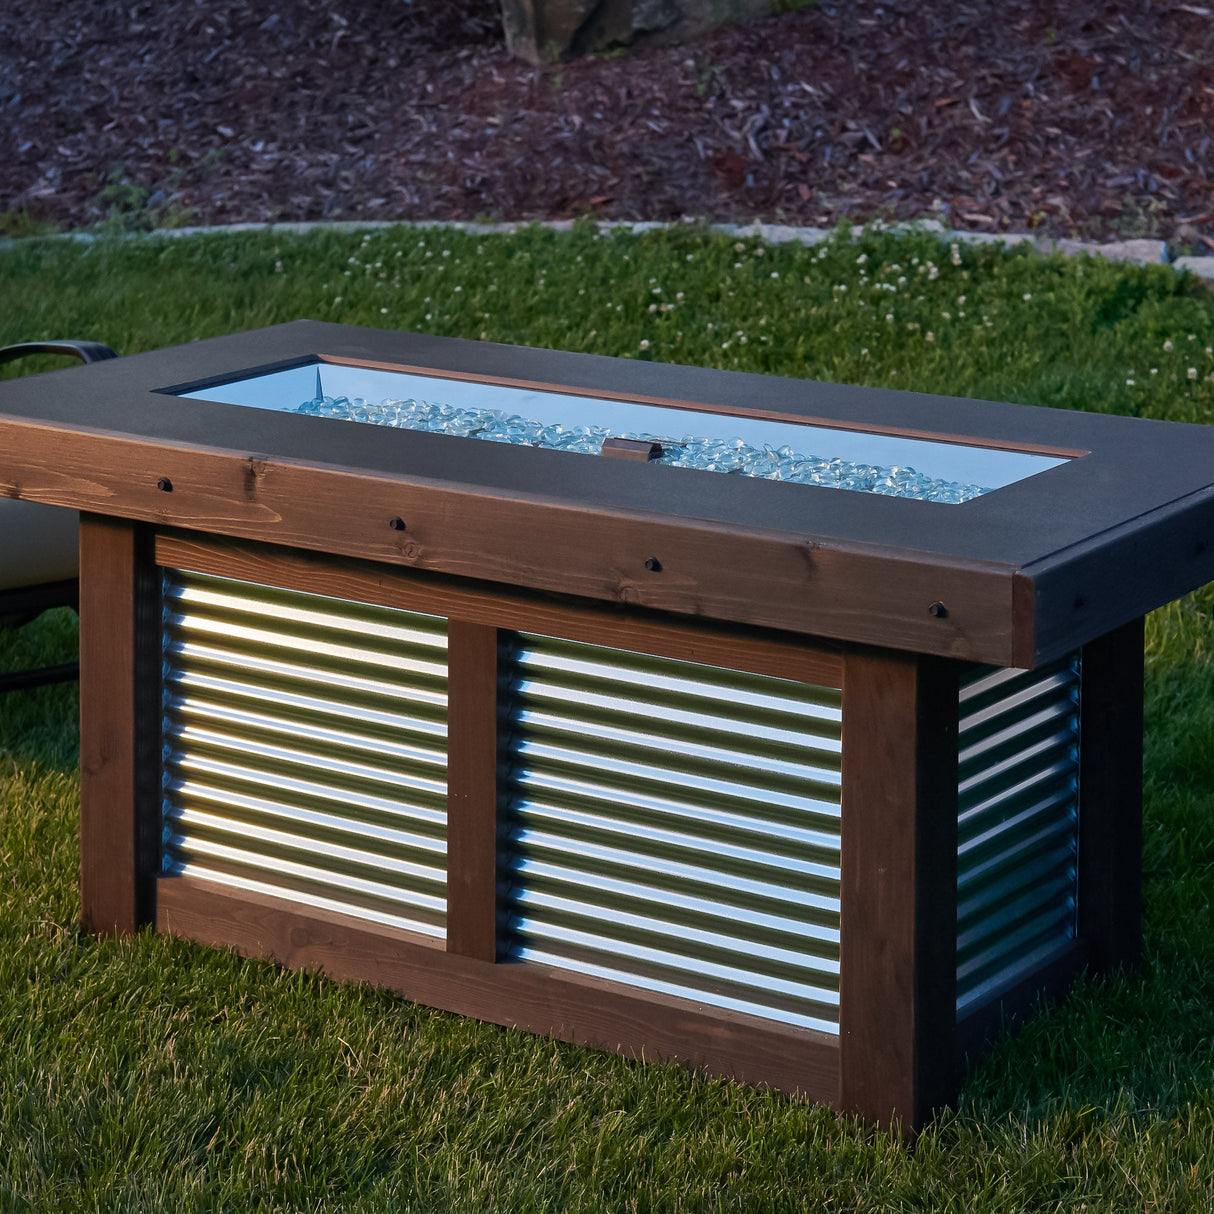 The Denali Brew Linear Gas Fire Pit Table placed on the grass of a backyard